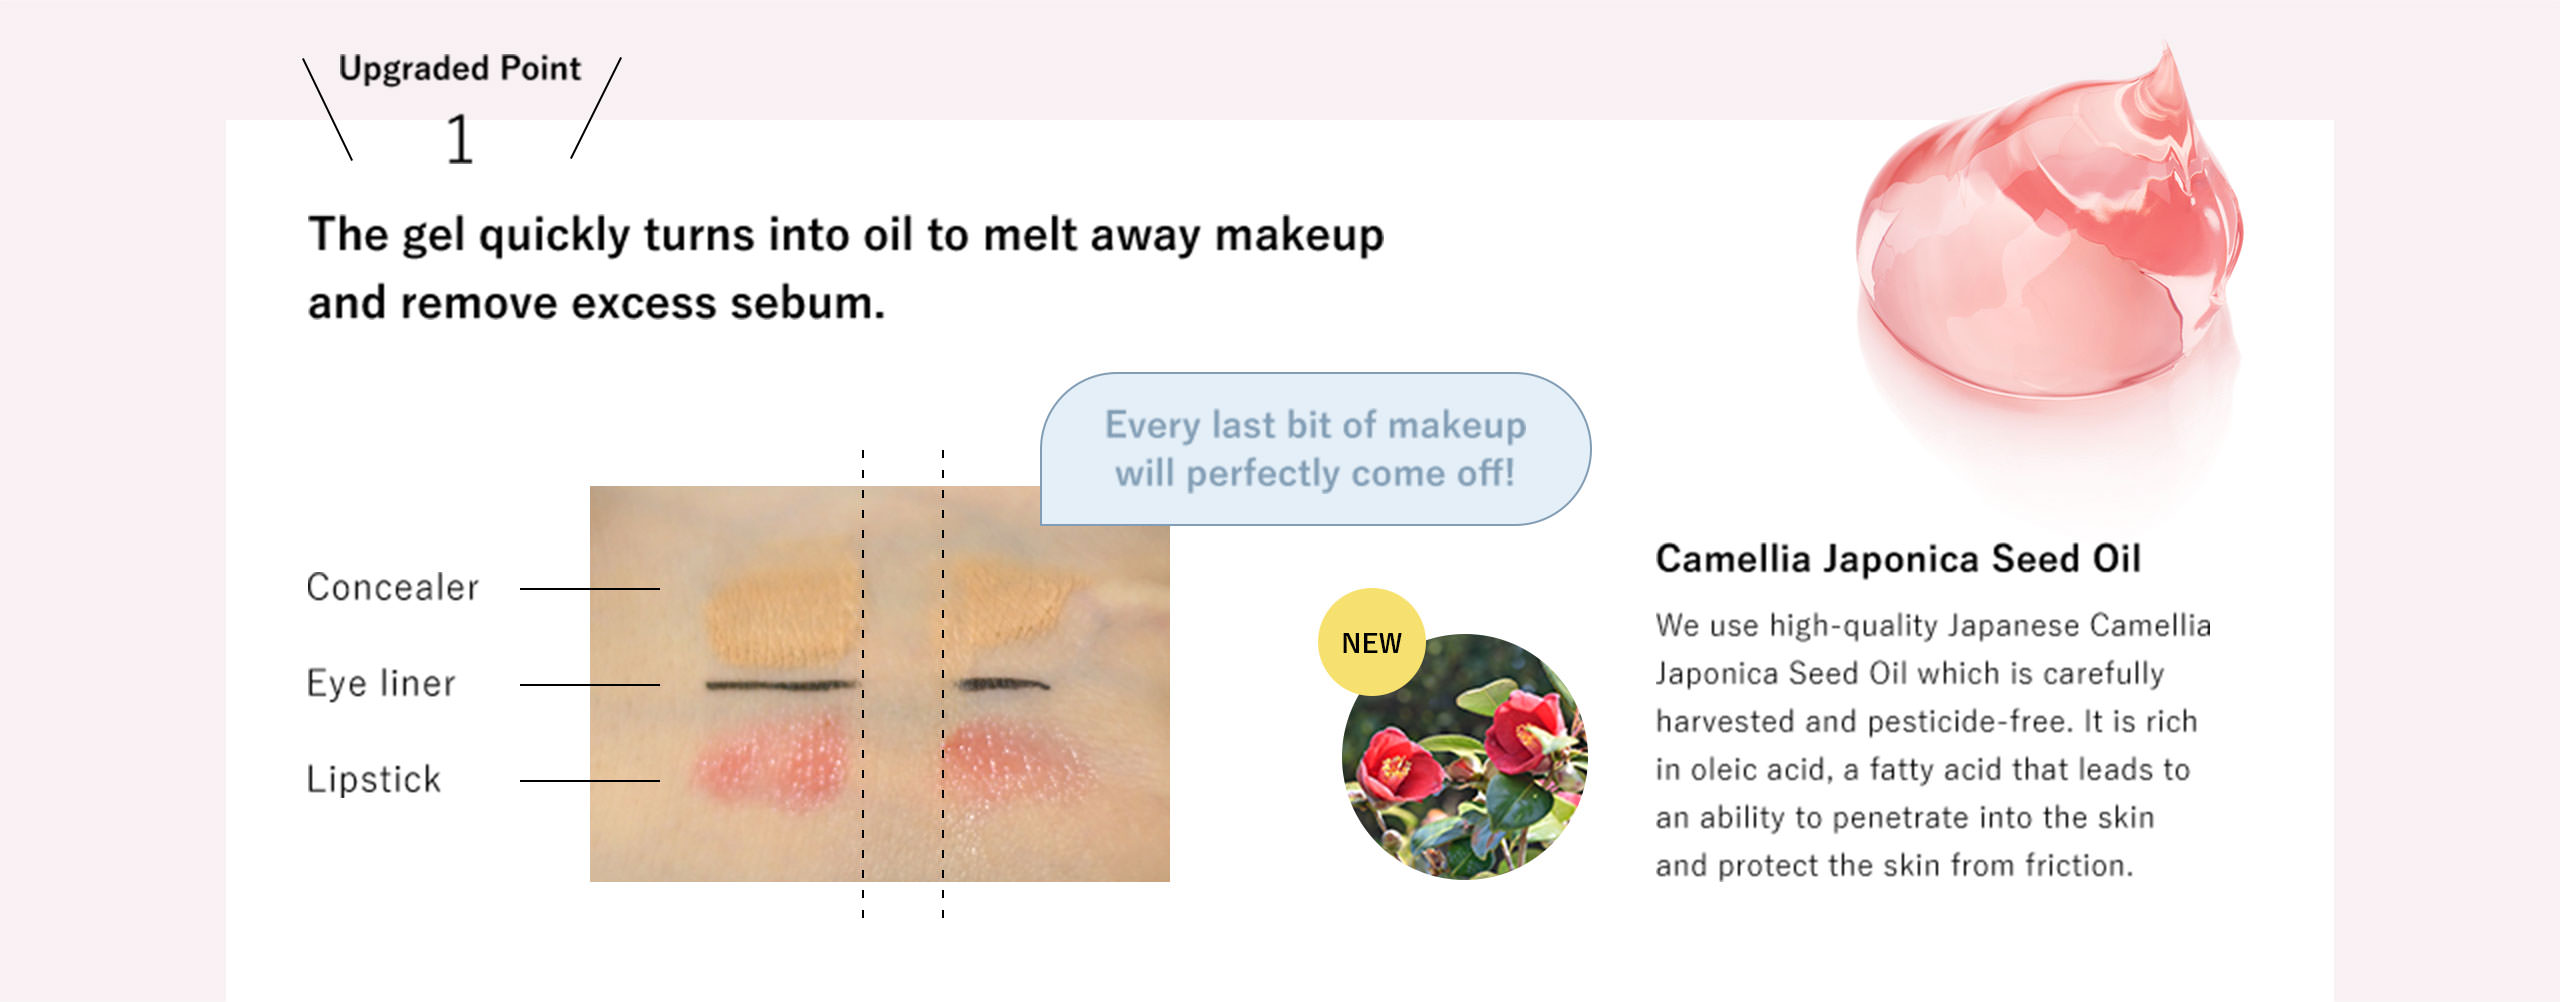 Upgraded Point 1: The gel quickly turns into oil to melt away makeup and remove excess sebum.